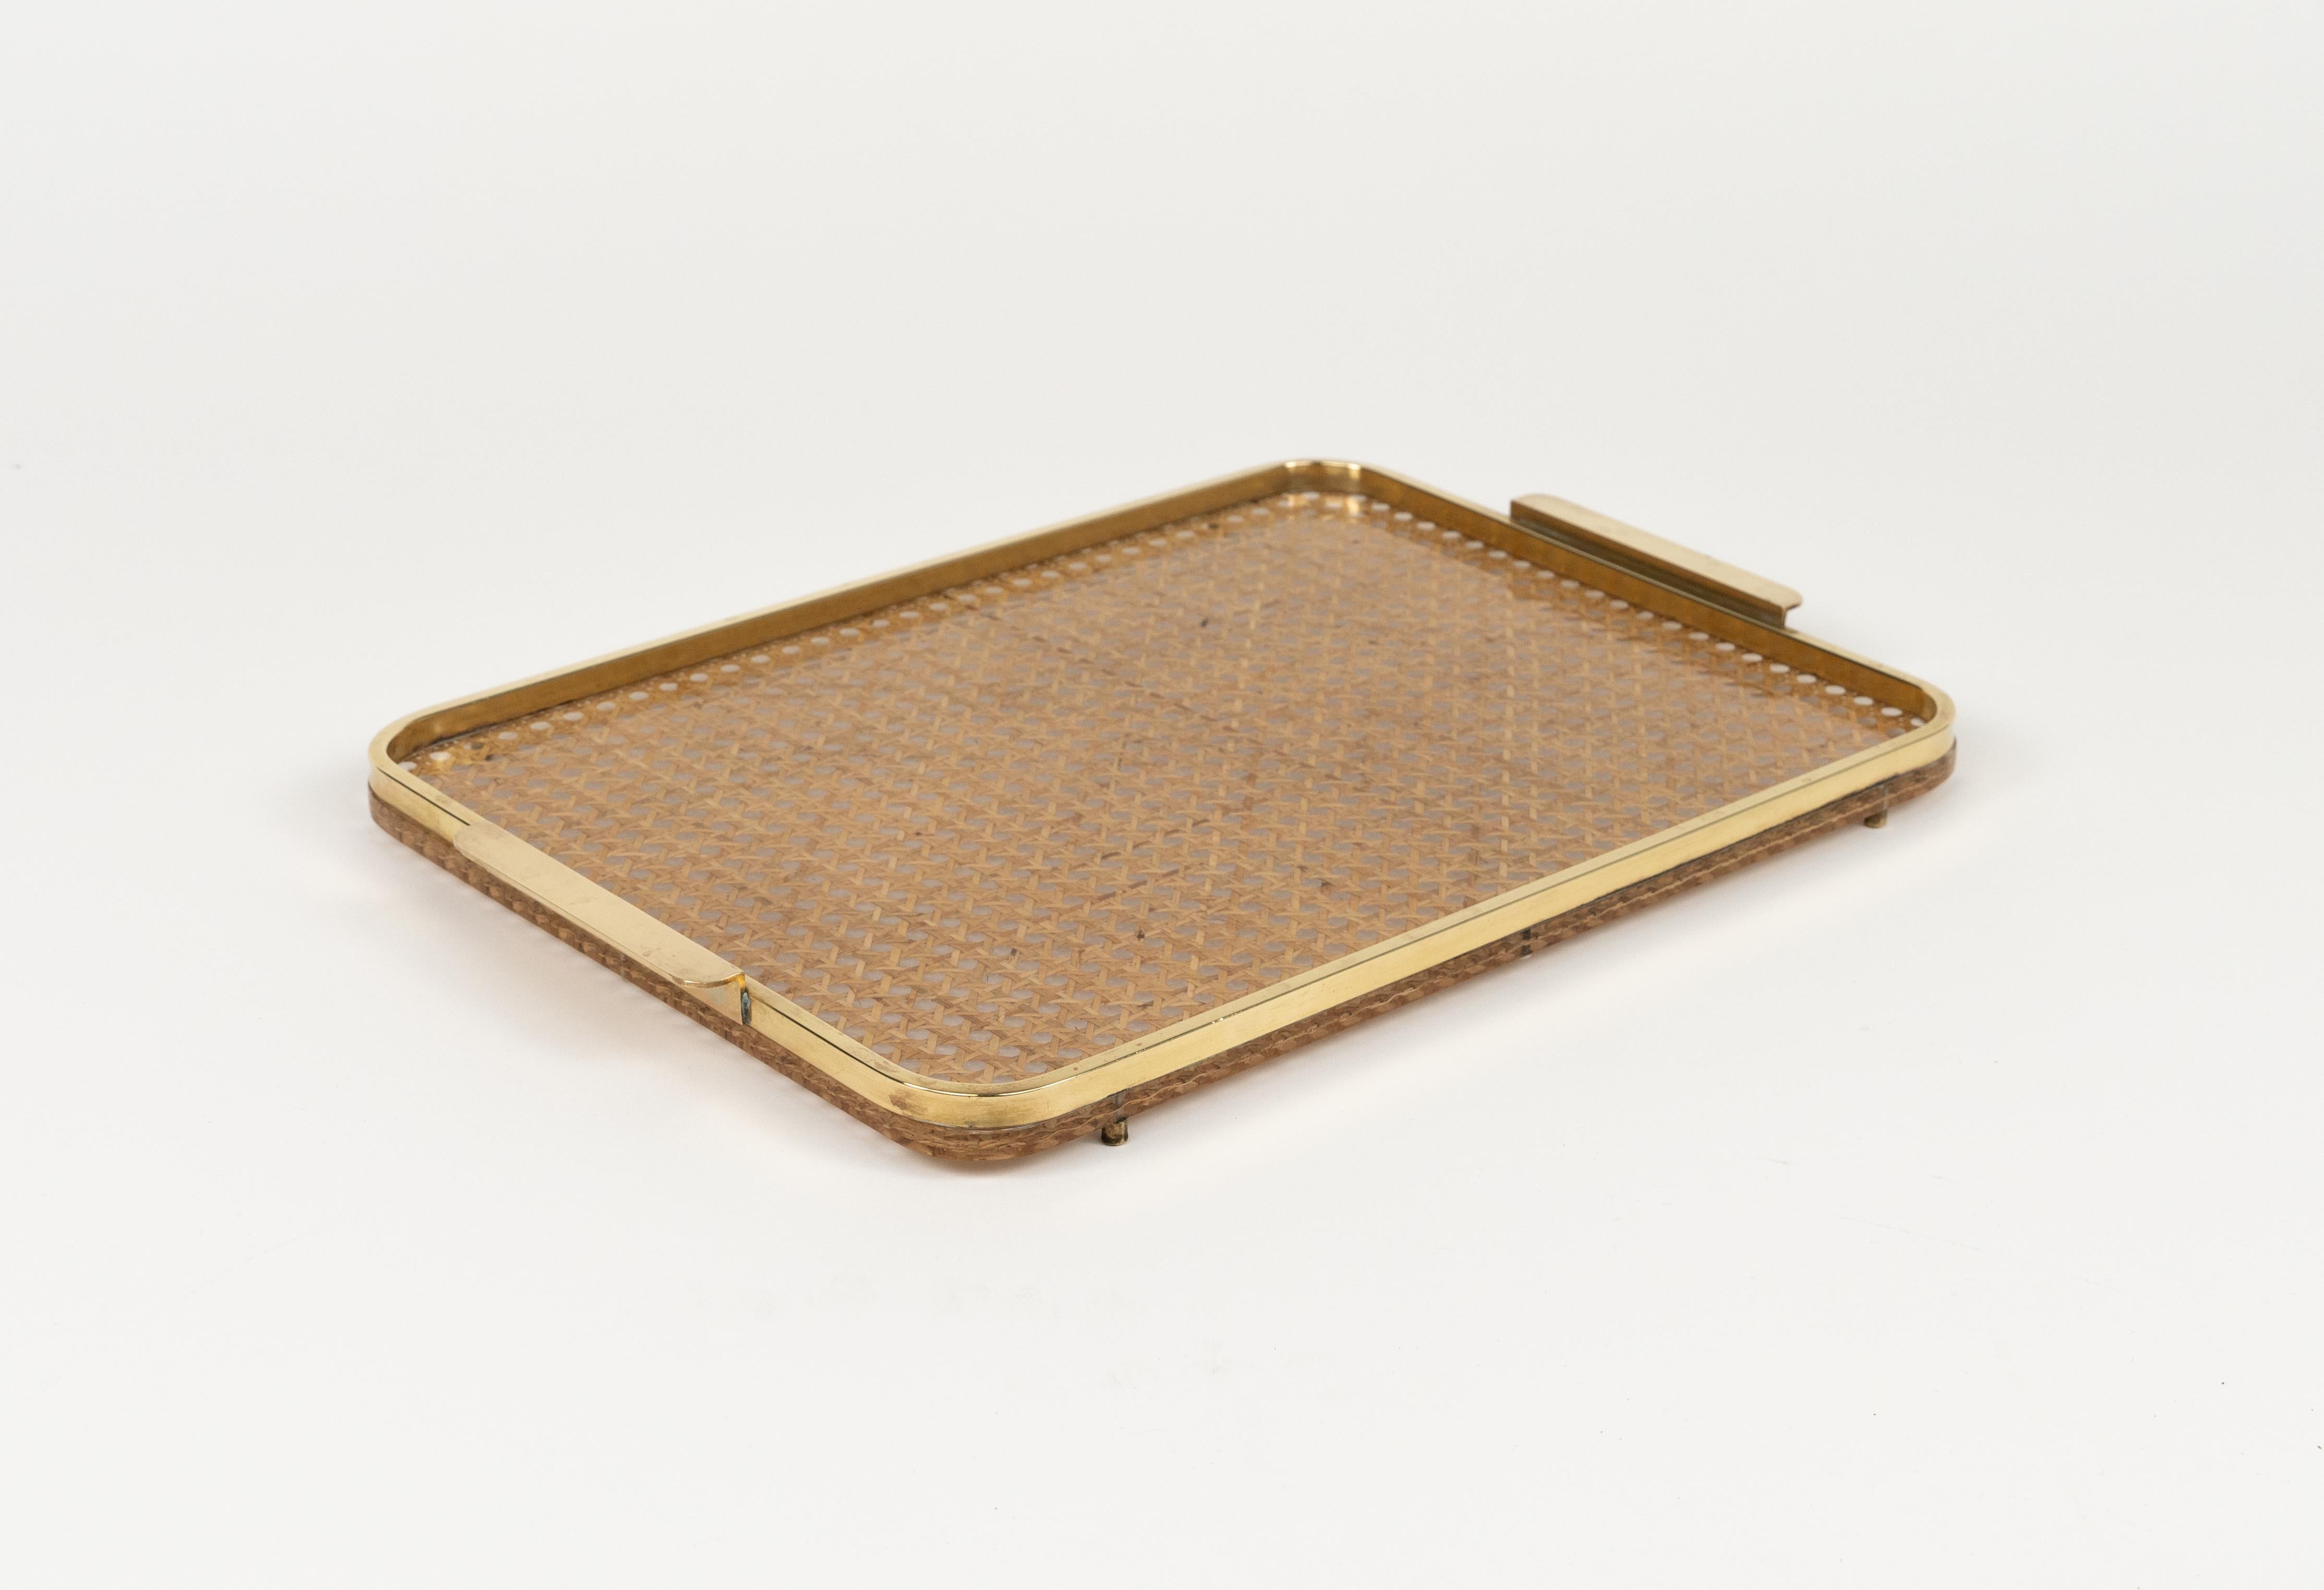 Italian Serving Tray in Lucite, Rattan and Brass Christian Dior Style, Italy, 1970s For Sale